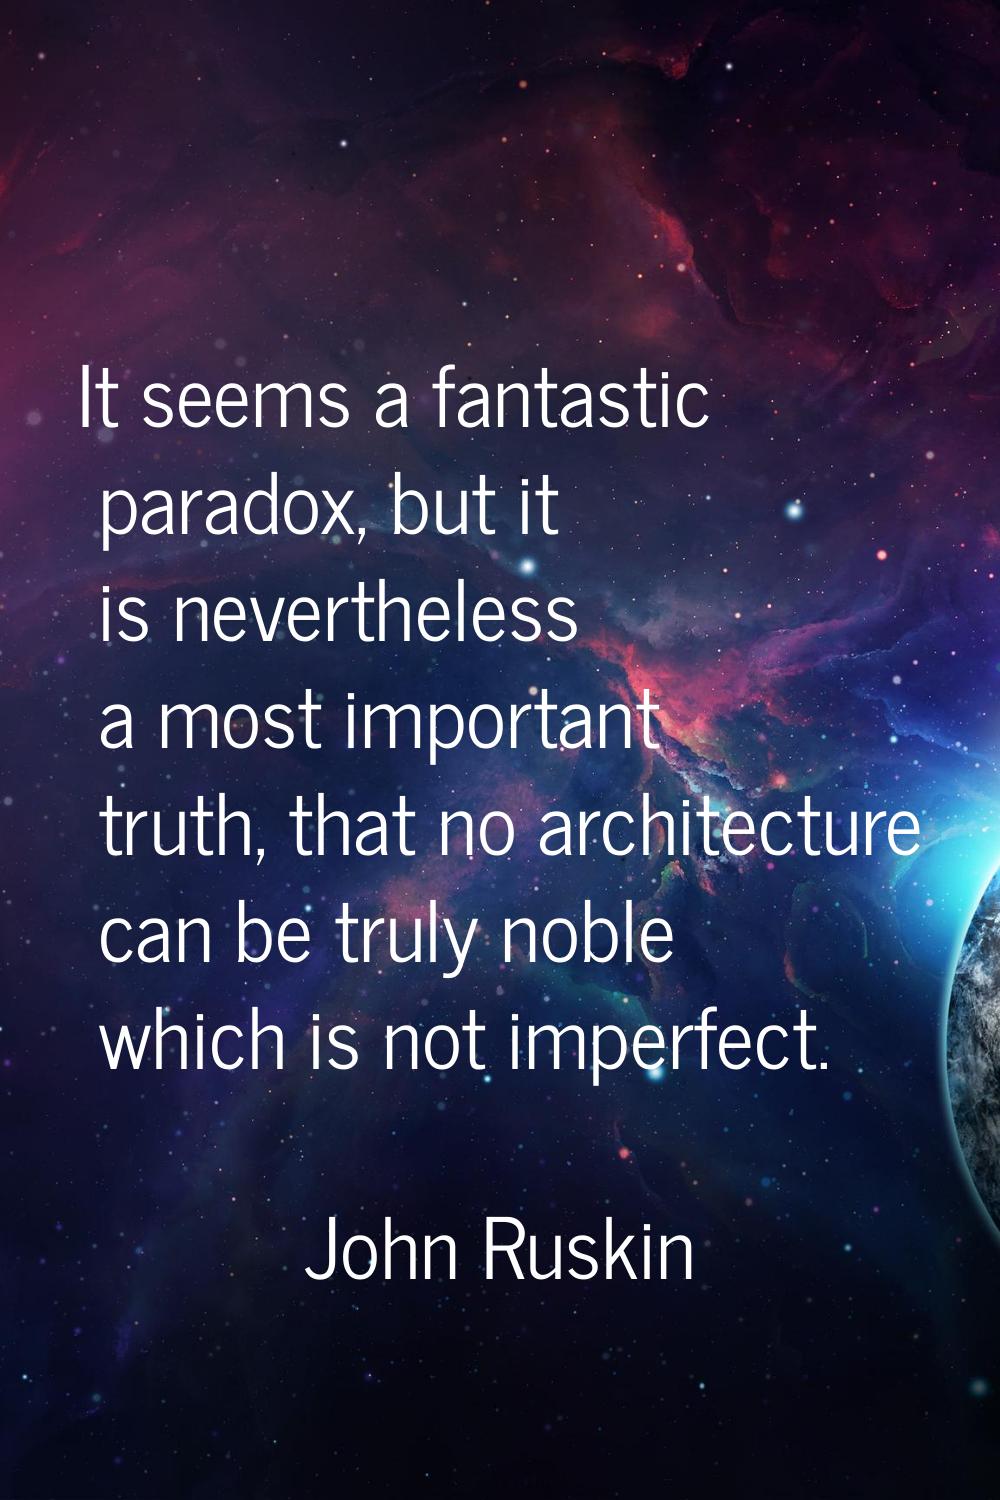 It seems a fantastic paradox, but it is nevertheless a most important truth, that no architecture c